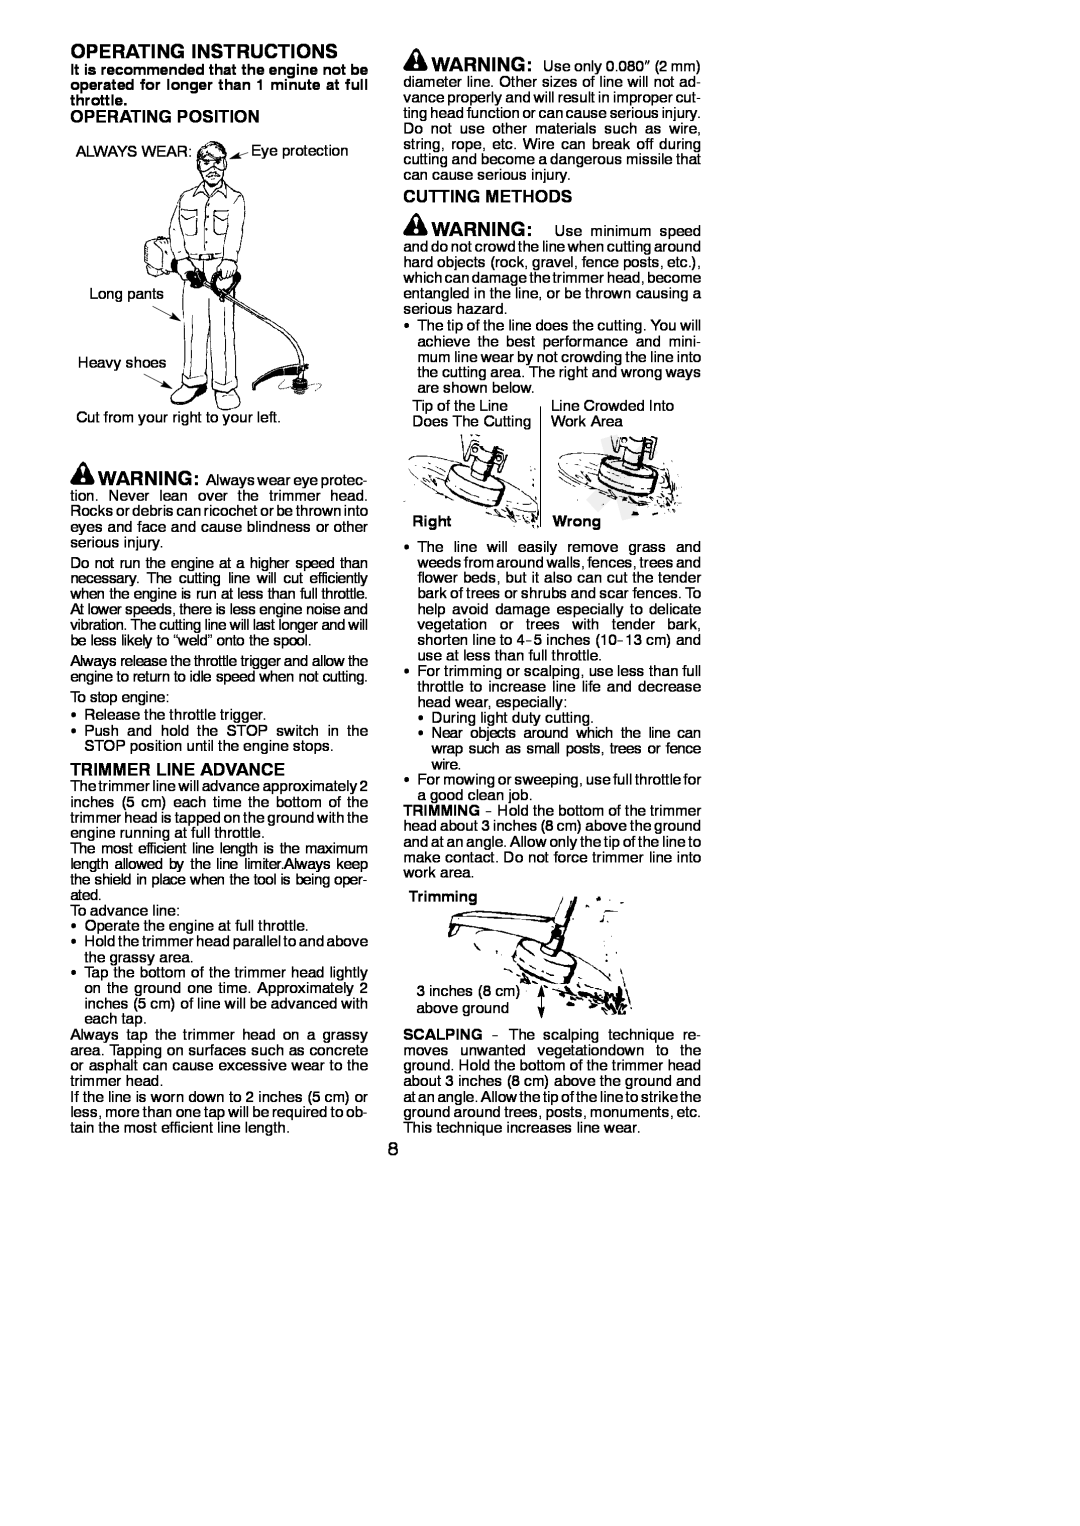 Weed Eater 795711814 Operating Instructions, Operating Position, Trimmer Line Advance, Cutting Methods, RightWrong 